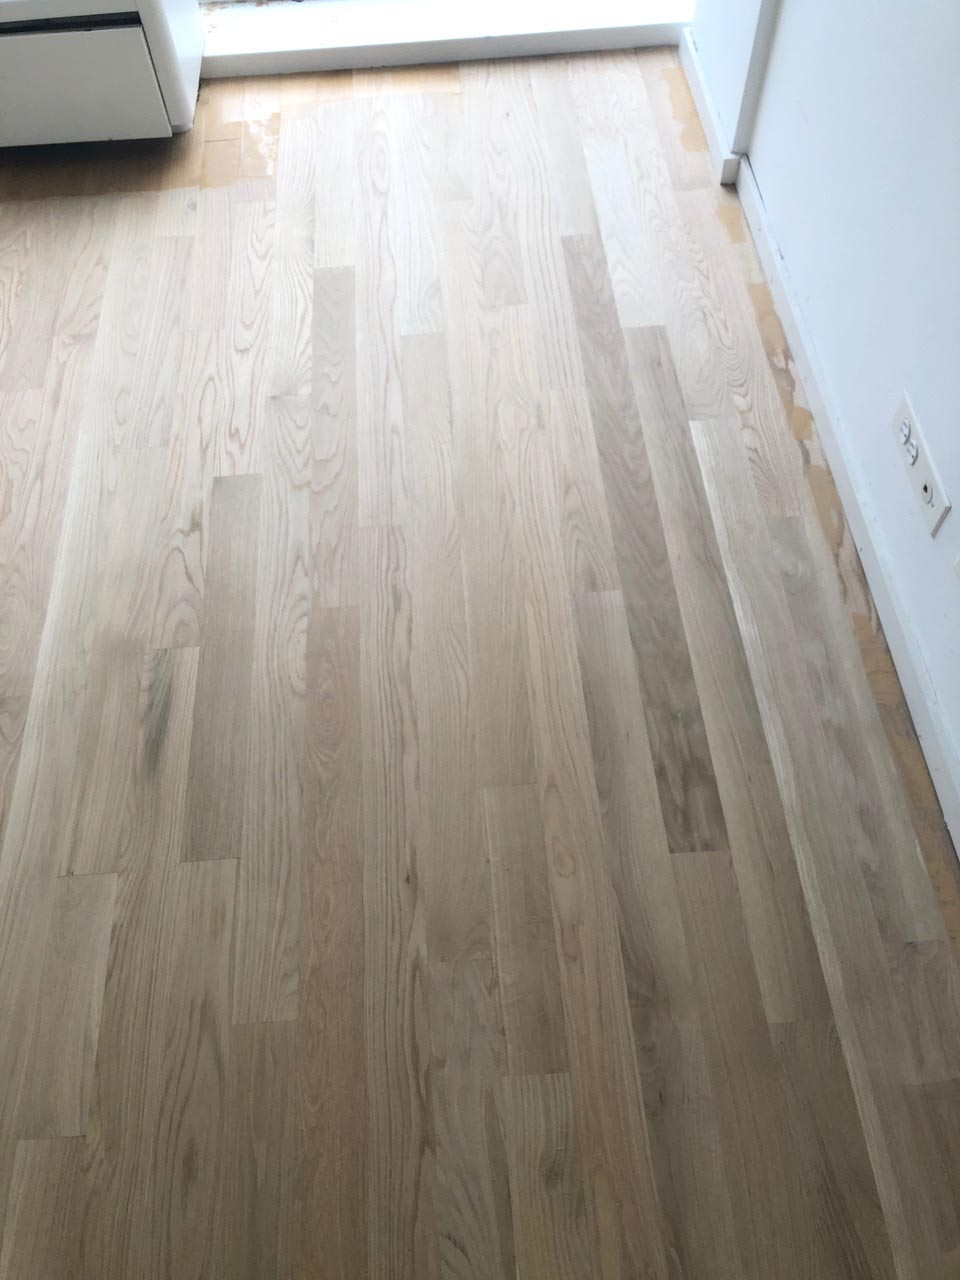 Resurfacing Wood Floors With Our Dustless System Machine